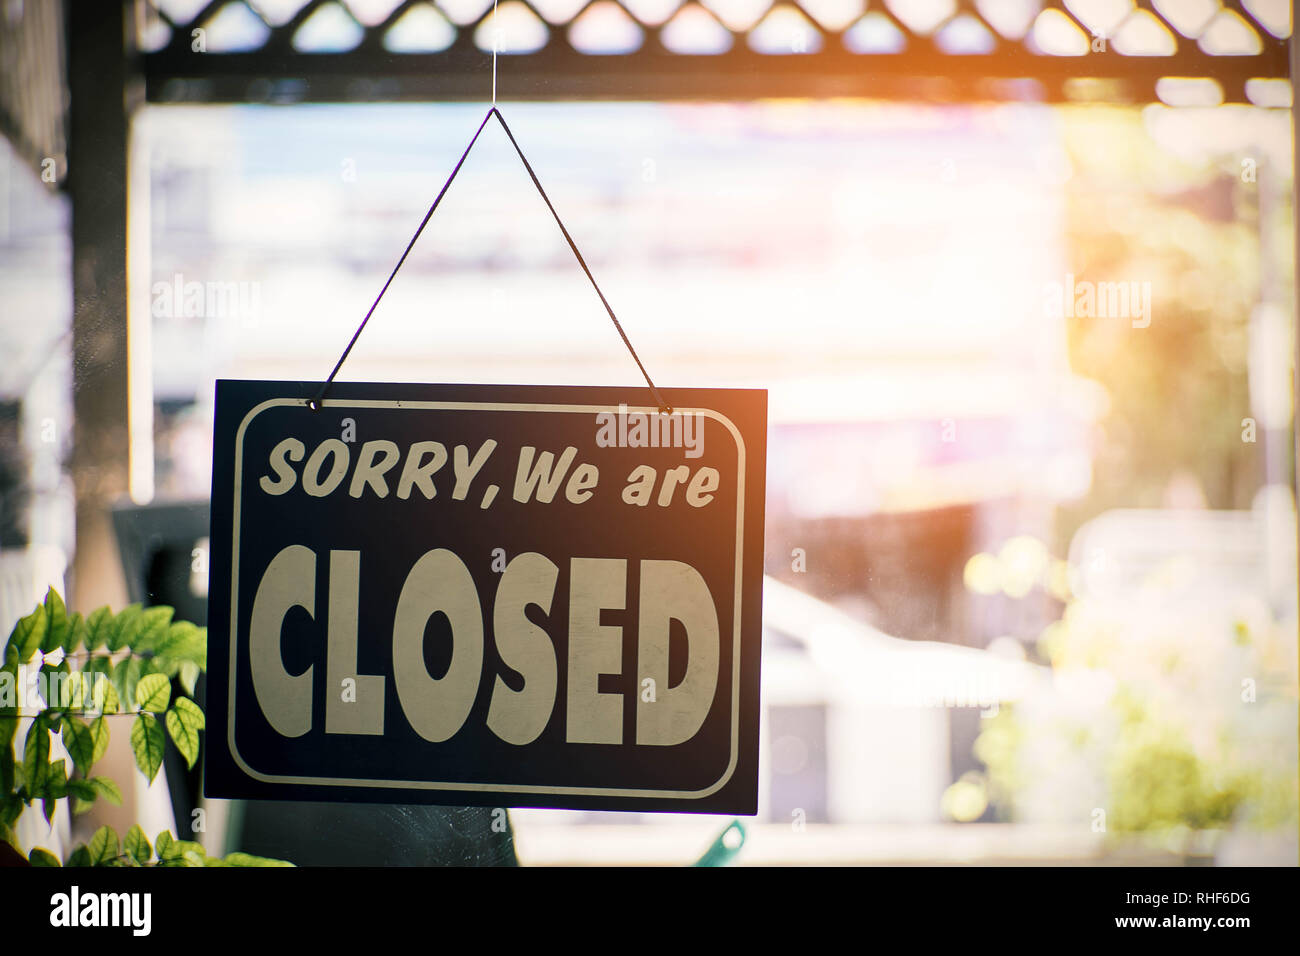 Closed sign.Sorry we are closed Stock Photo